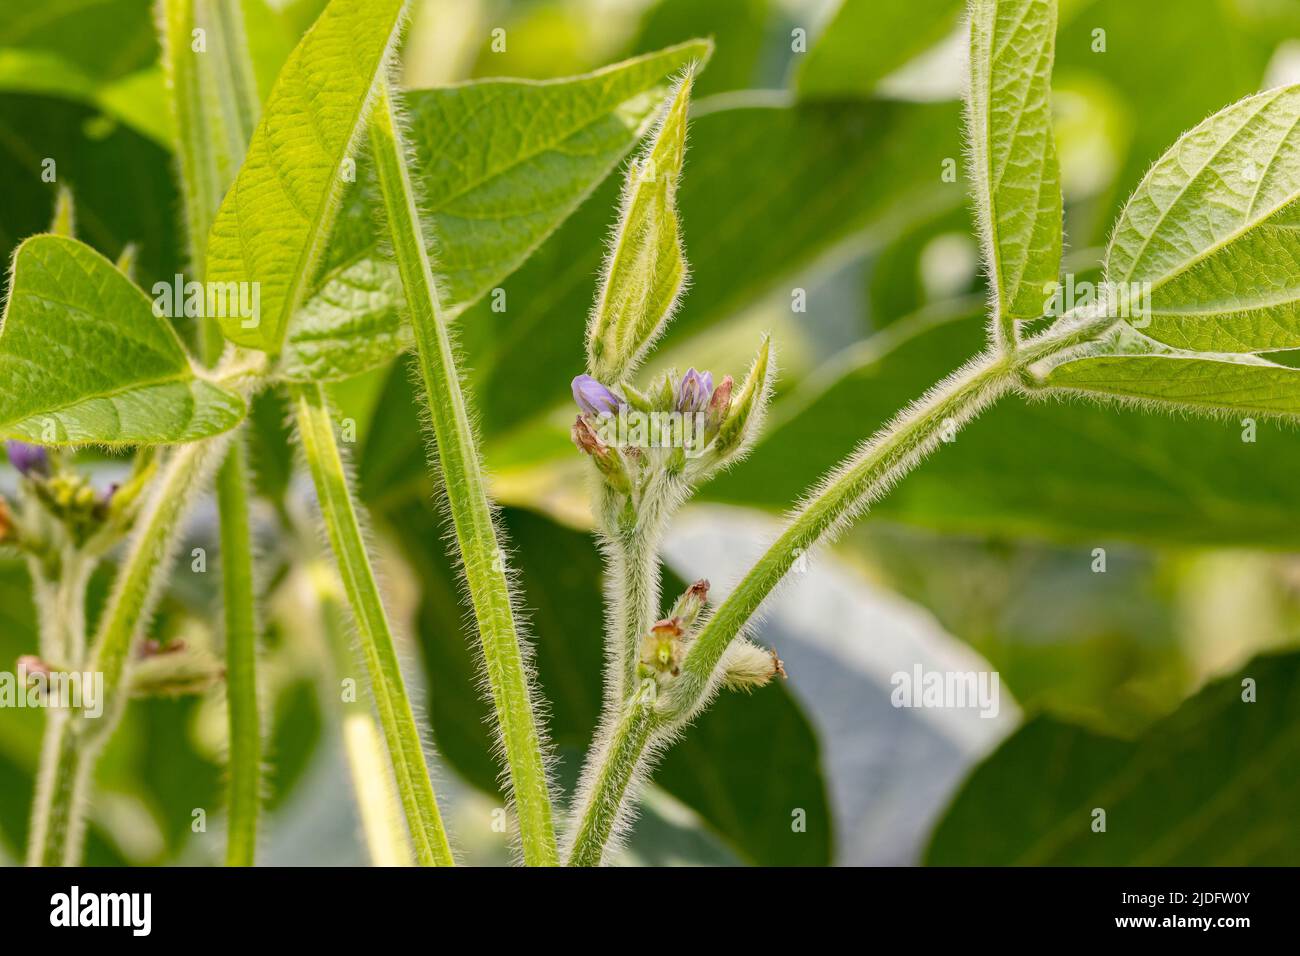 Soybean plant flower and pod. Pollination, plant health and farming concept. Stock Photo